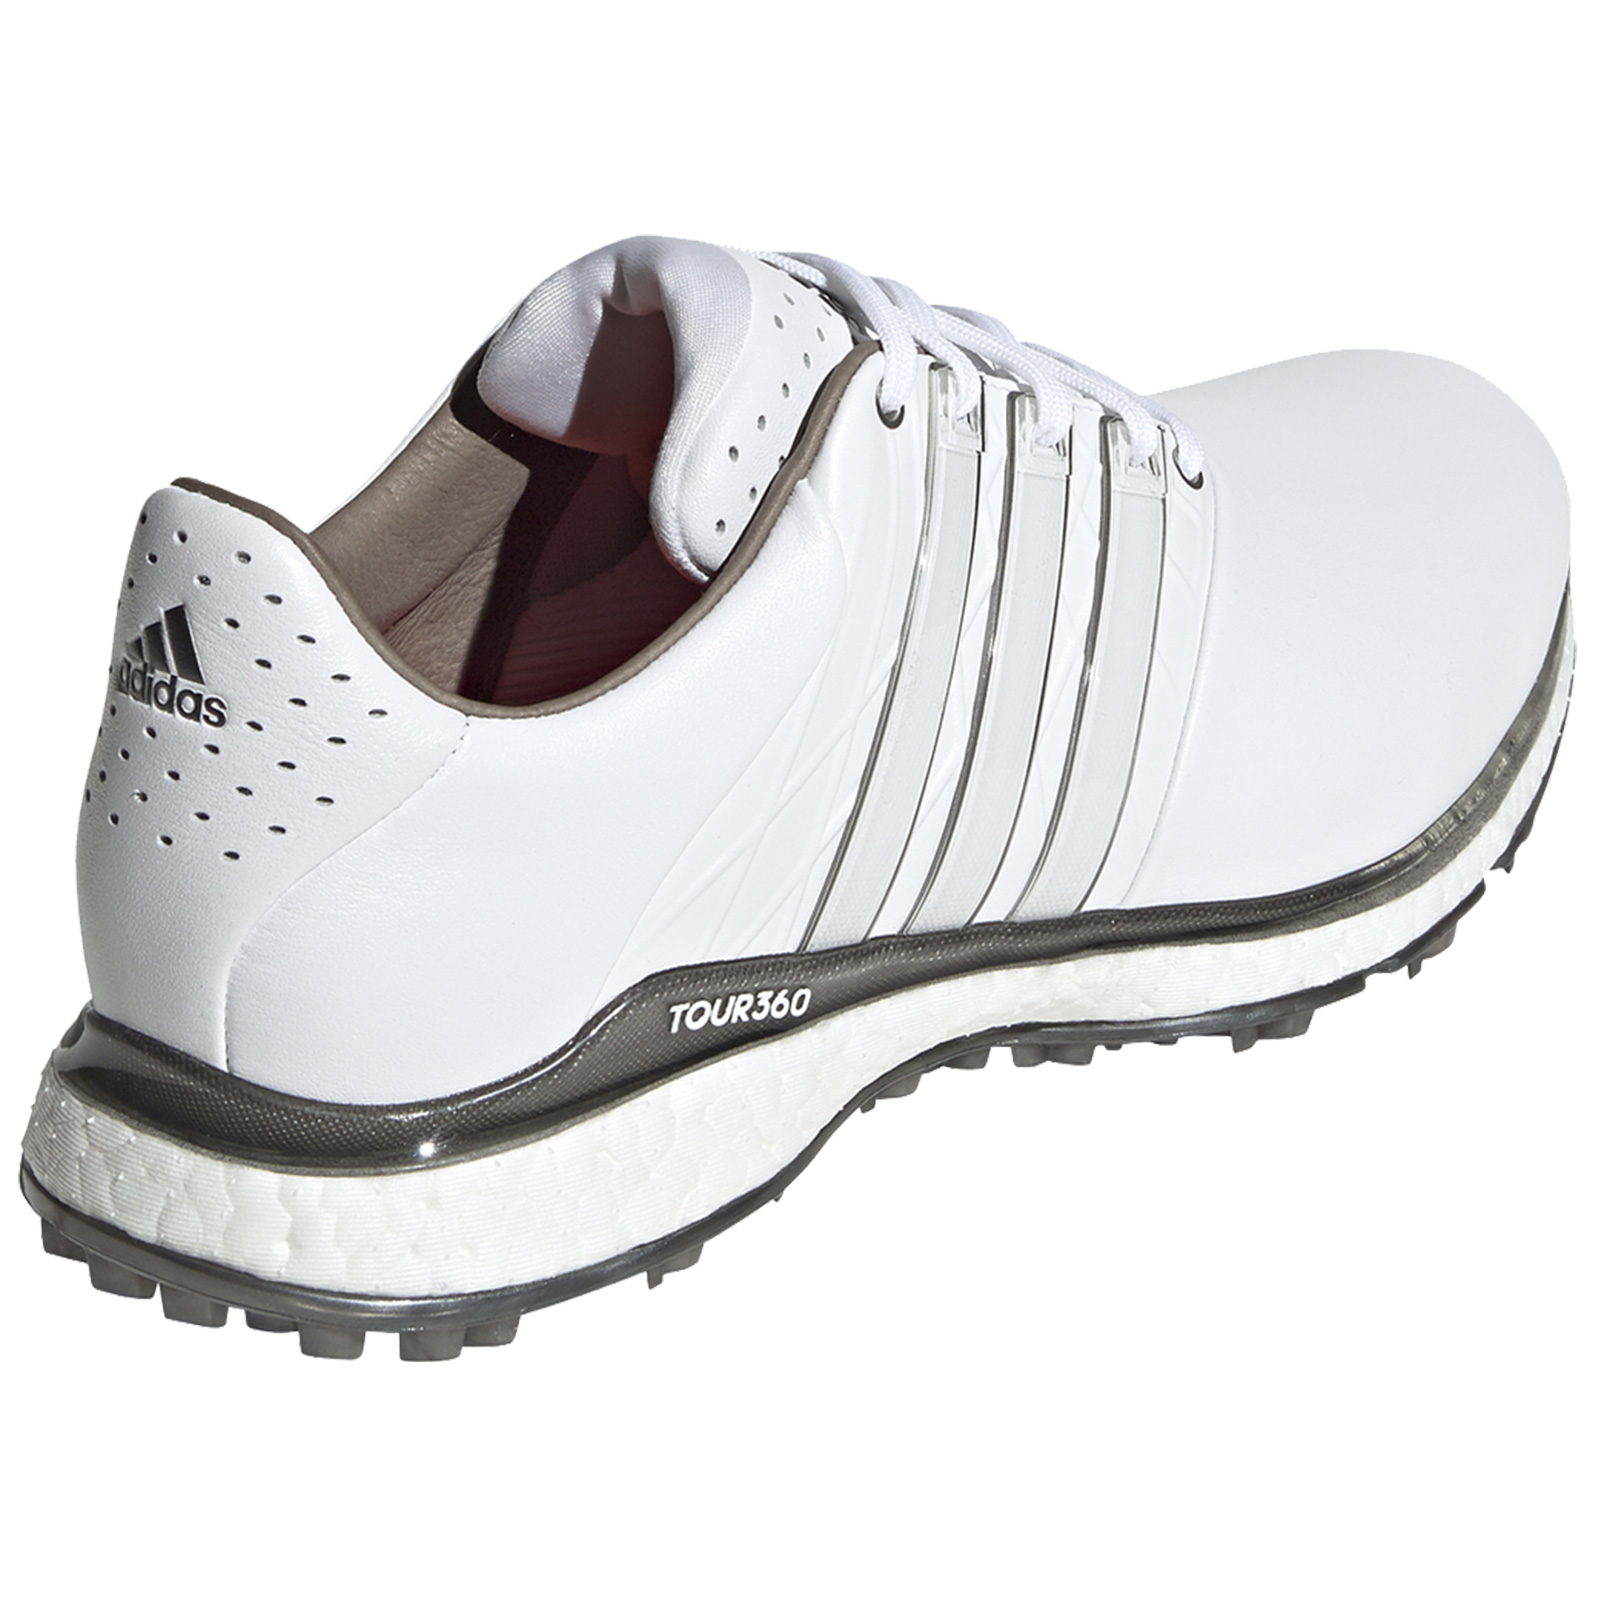 2020 adidas Mens Tour360 XT-SL 2.0 Spikeless Golf Shoes Laces Waterproof Leather | eBay